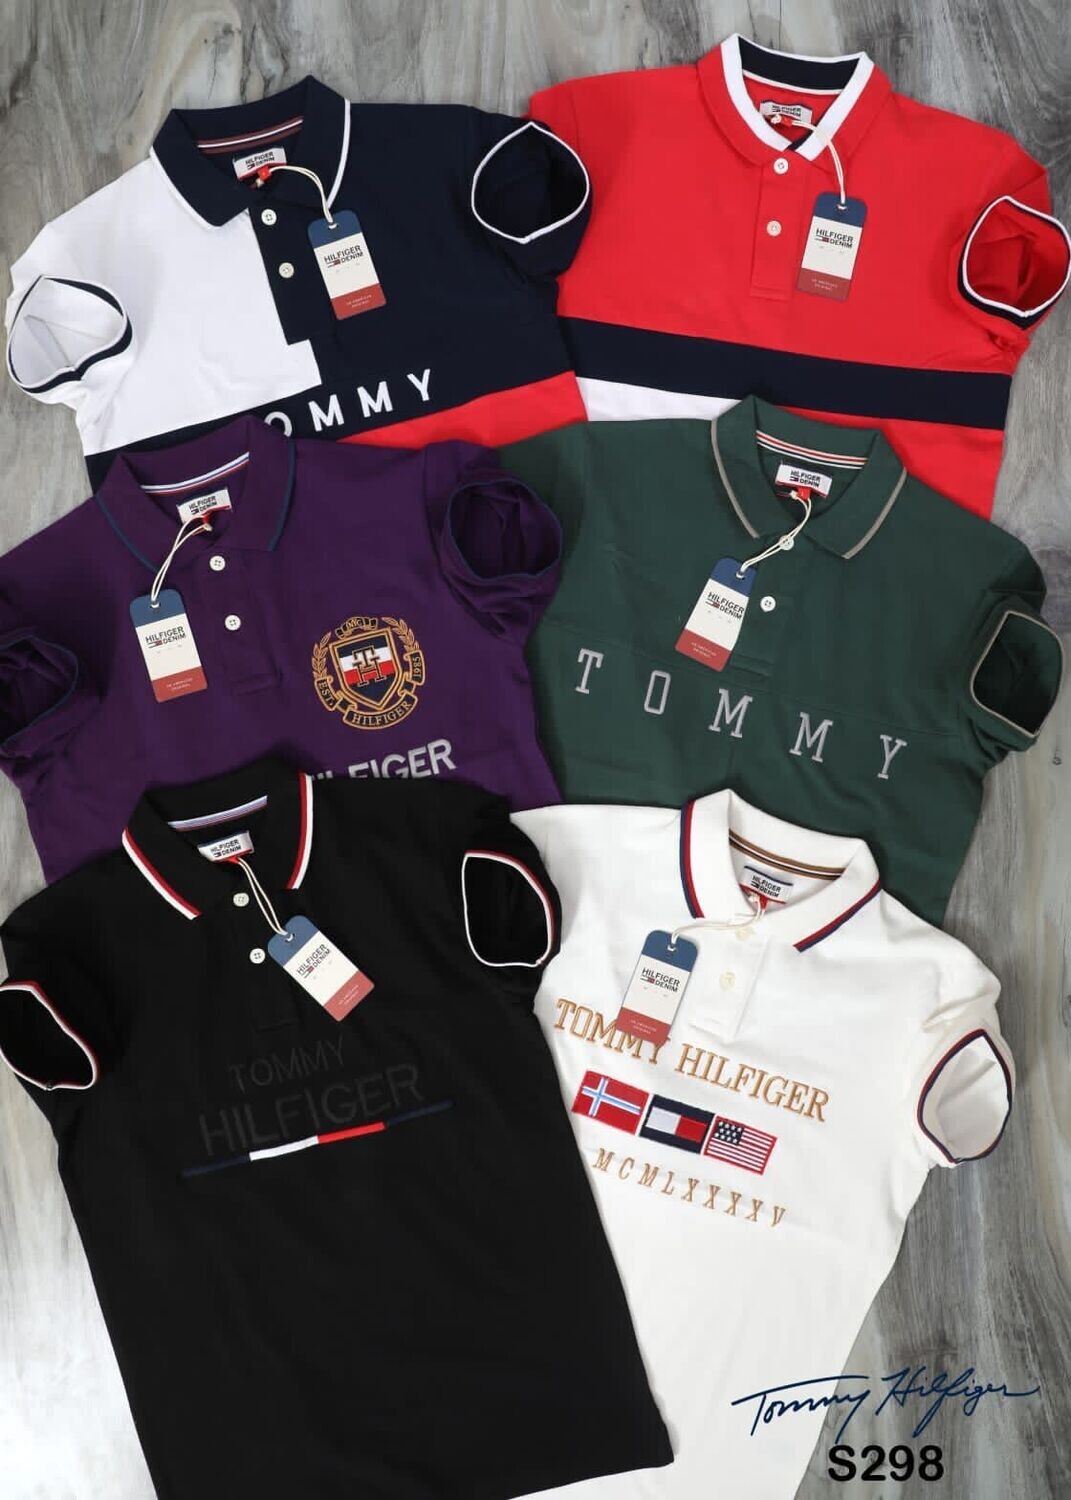 TOMMY HILFIGER 100% COMBED COTTON PIQUE *BIO WASHED -40 pc